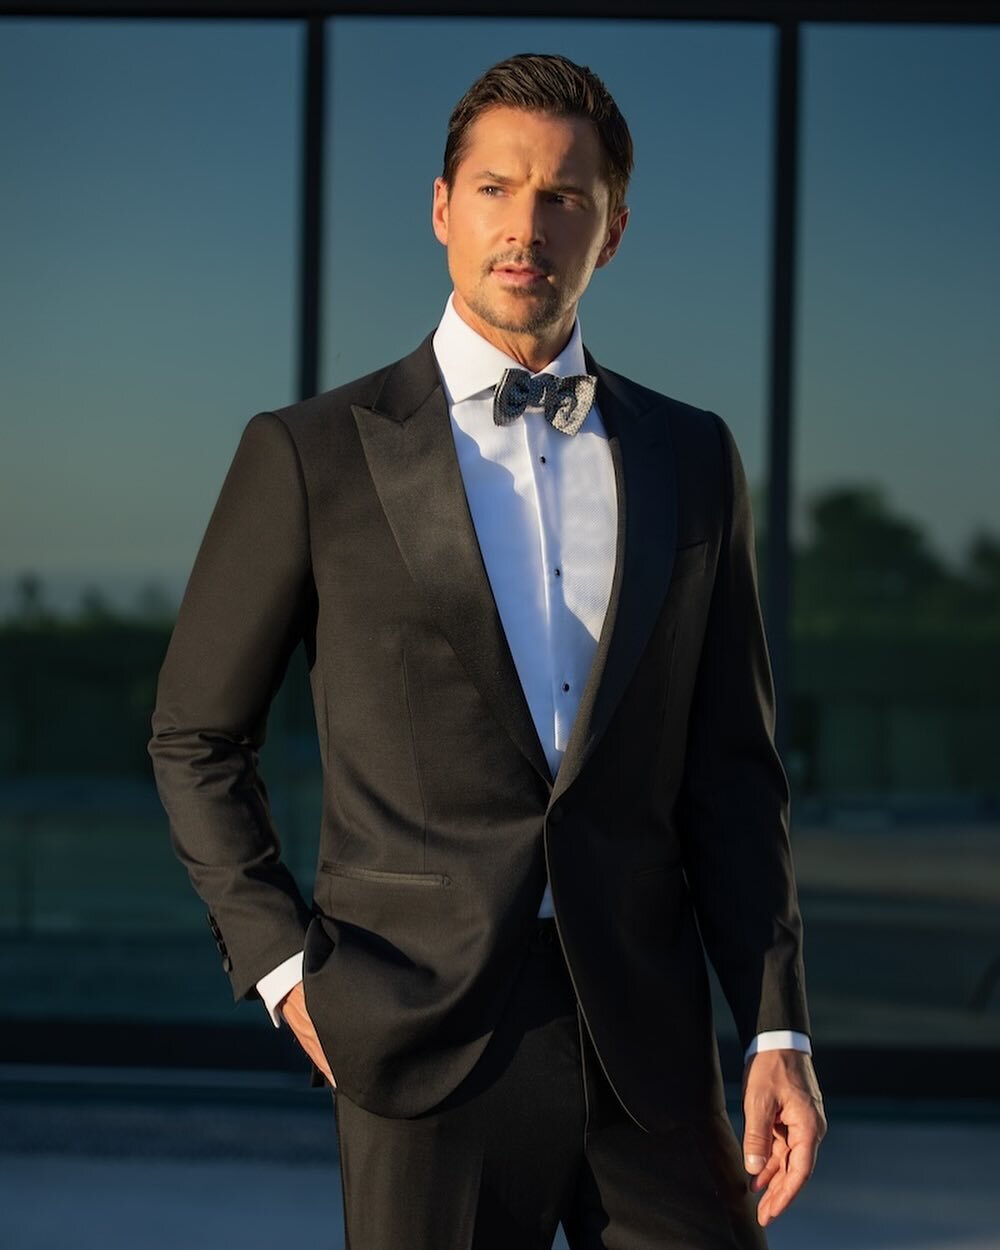 Introducing elegance at its finest: our 1-button peak lapel black tuxedo. A timeless classic that exudes confidence and sophistication. Whether it&rsquo;s a gala, wedding, or a special occasion, this impeccable attire will make you stand out from the